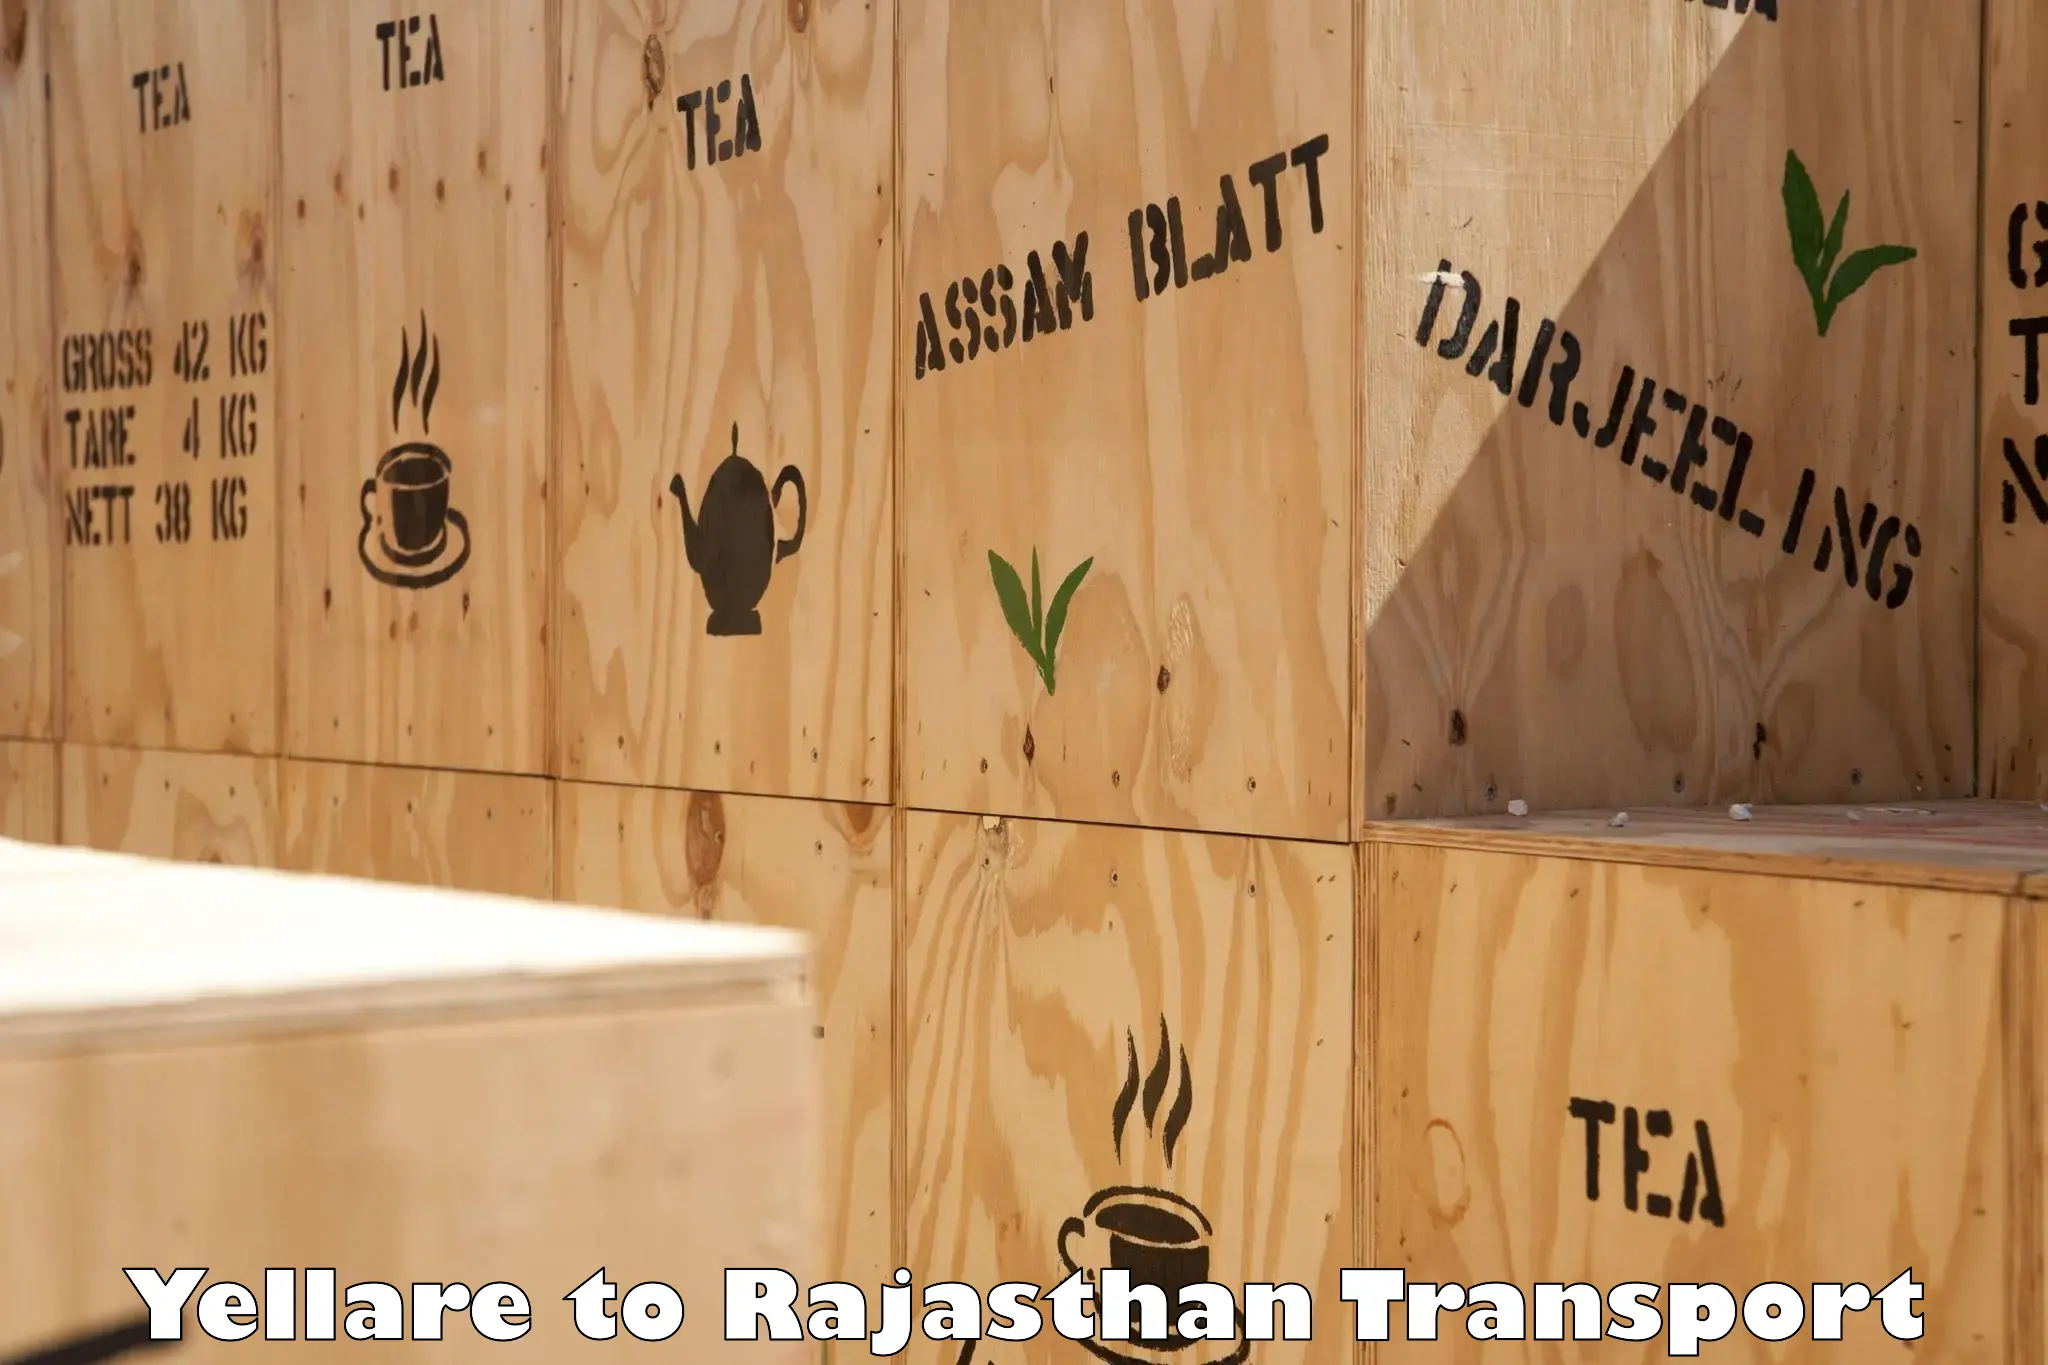 Part load transport service in India Yellare to Rajgarh Rajasthan